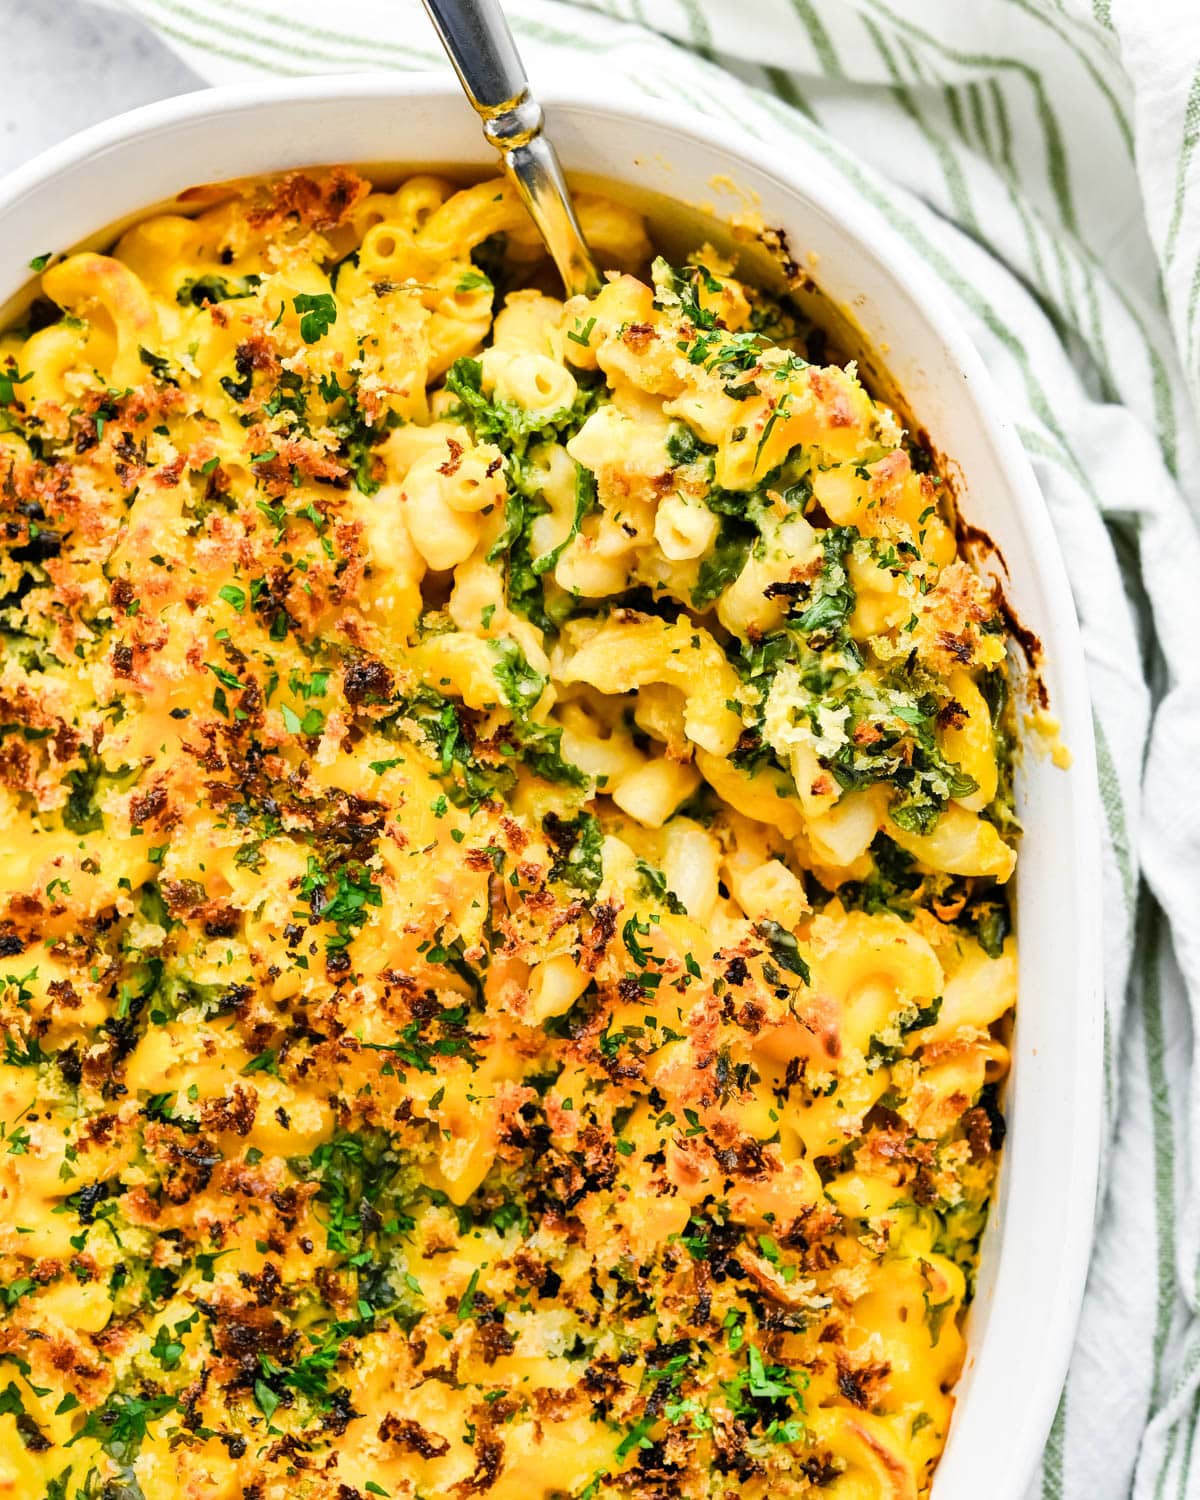 Baked healthy mac and cheese with a crispy breadcrumb topping.